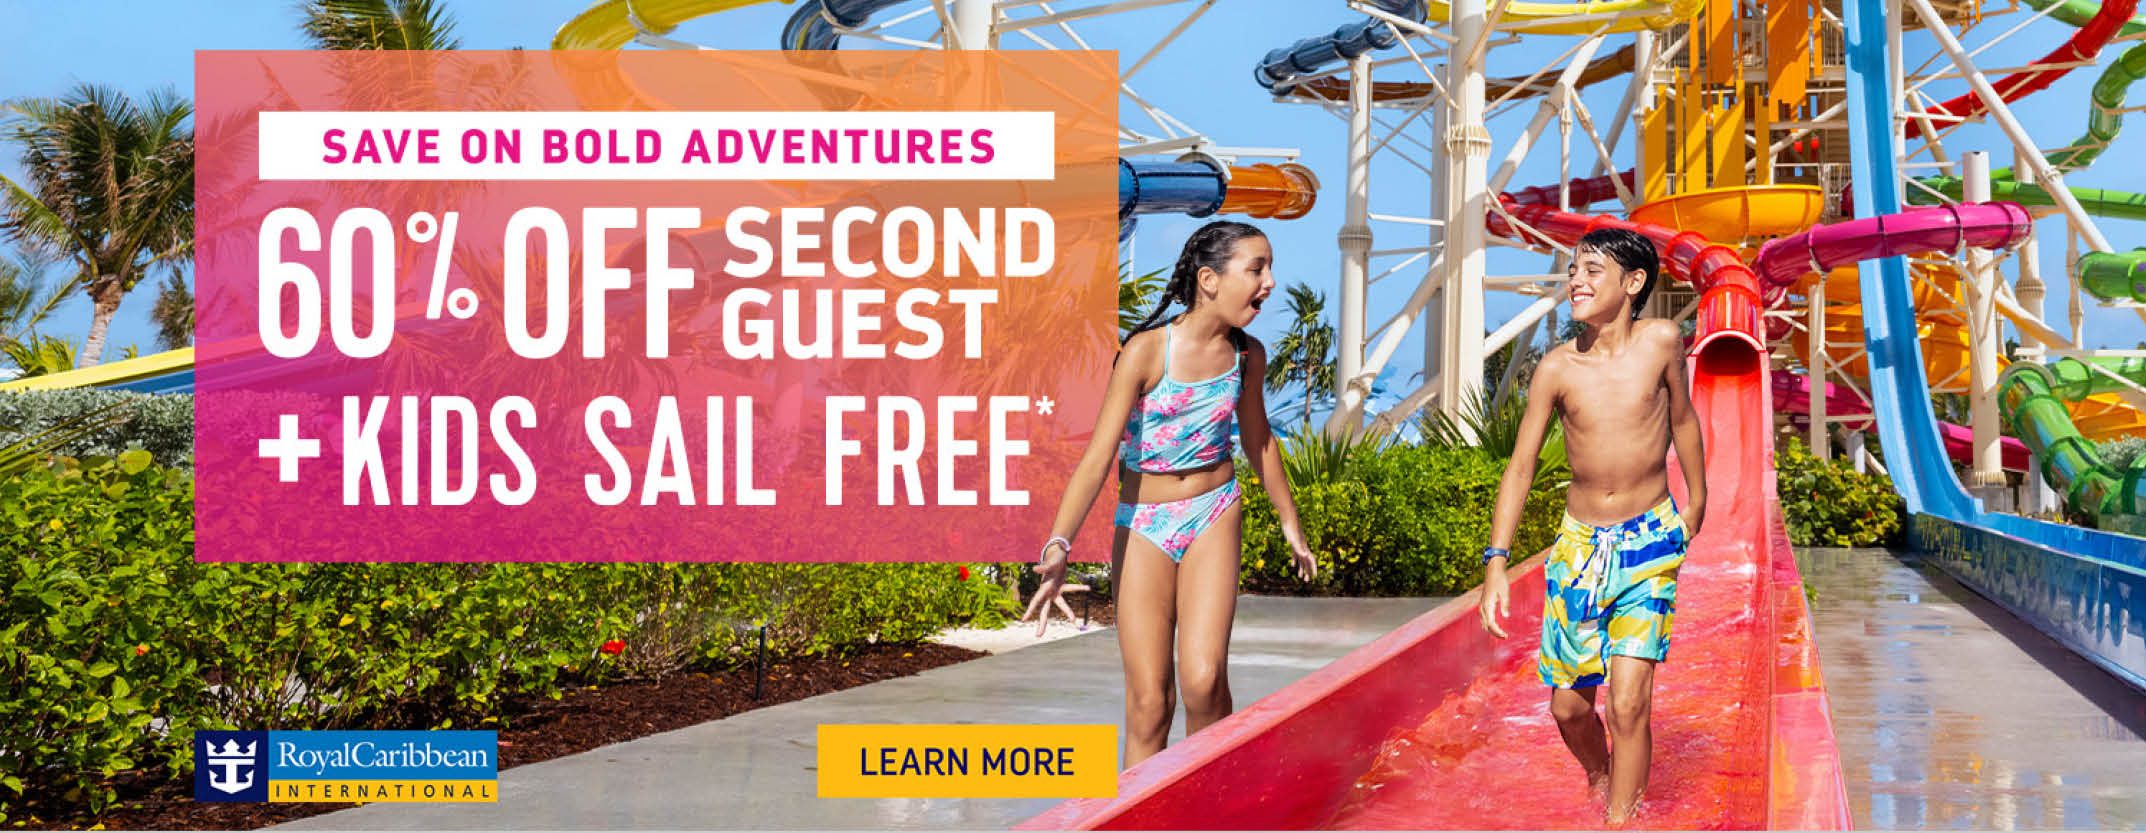 Royal Caribbean Cruise Lines promotion